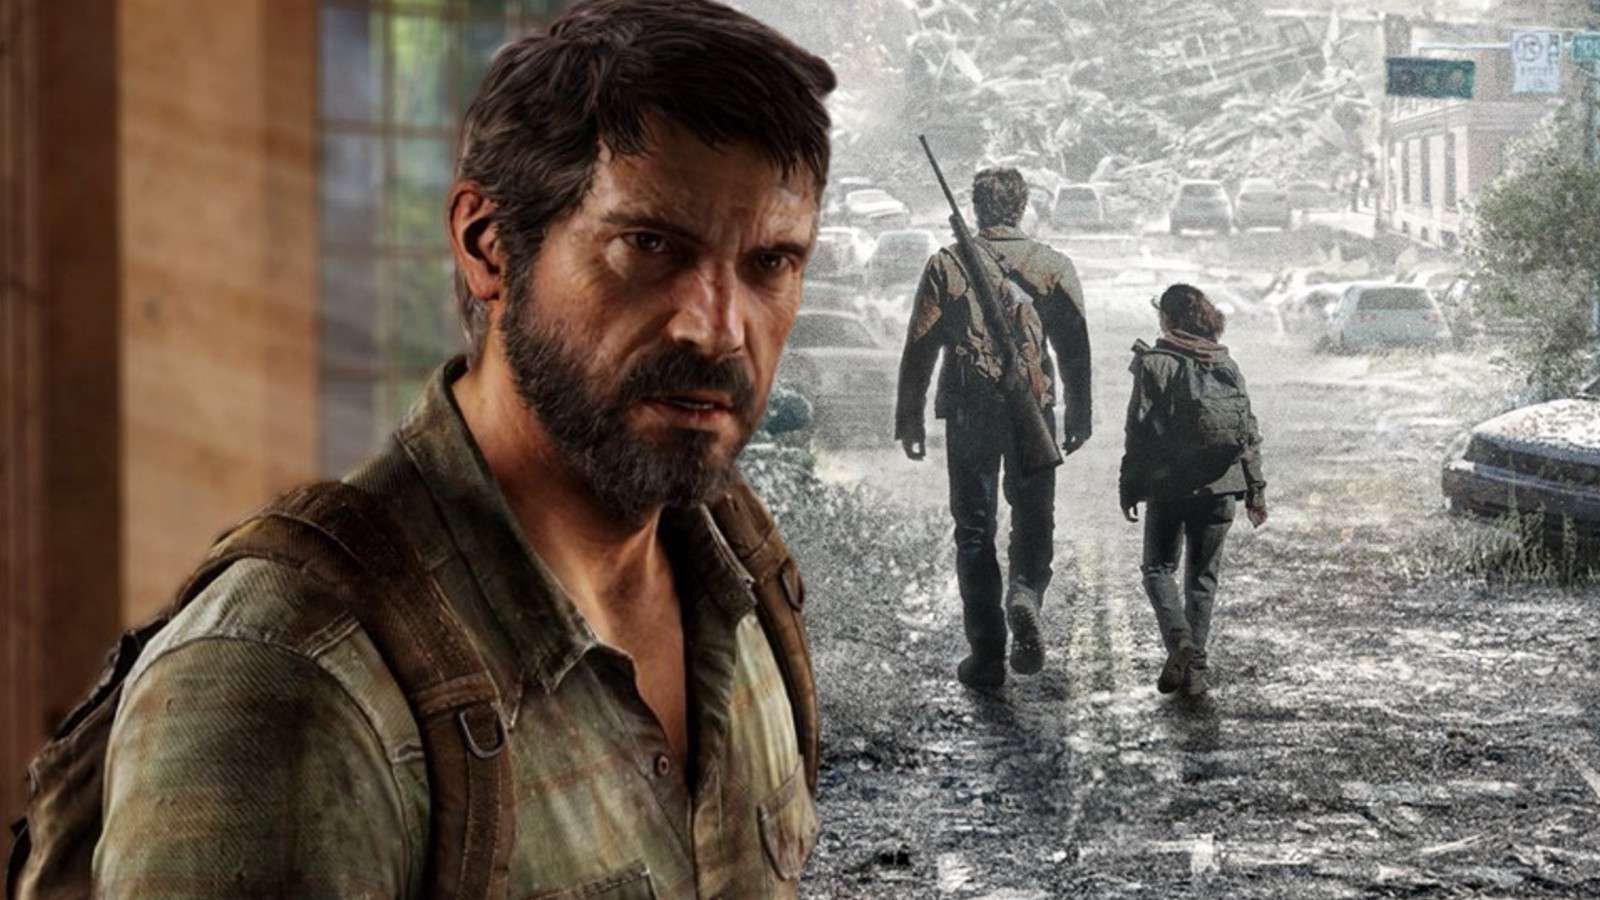 Joel in The Last of Us and a still from The Last of Us HBO show